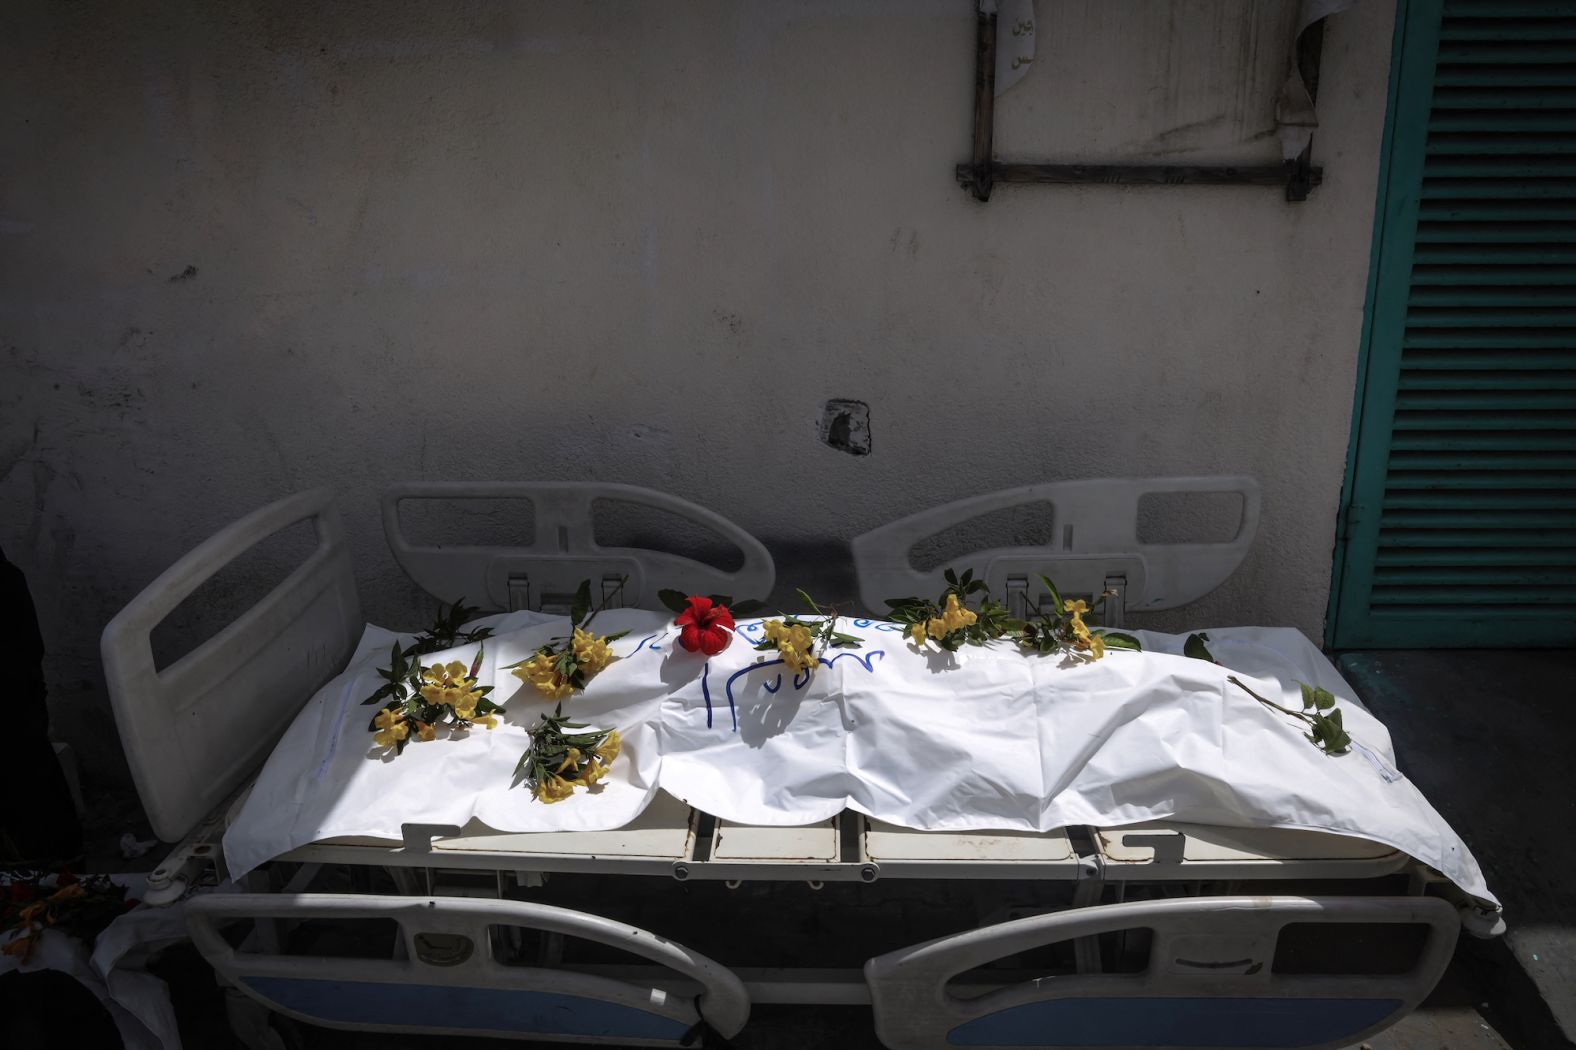 A body unearthed at Nasser Hospital is set on a stretcher and covered with flowers before being buried in Khan Younis, Gaza, on Tuesday, April 23. <a href="https://www.cnn.com/2024/04/25/middleeast/gaza-400-bodies-mass-grave-hospital-intl/index.html" target="_blank">Nearly 400 bodies have been found in mass graves at the hospital</a> following Israeli troops' withdrawal from the area earlier this month, the Palestinian Civil Defense in Gaza said on Thursday. The Israel Defense Forces has said any suggestion that it buried Palestinian bodies in mass graves was false, and that a grave at the Nasser complex was dug by Palestinians in Gaza some months ago.